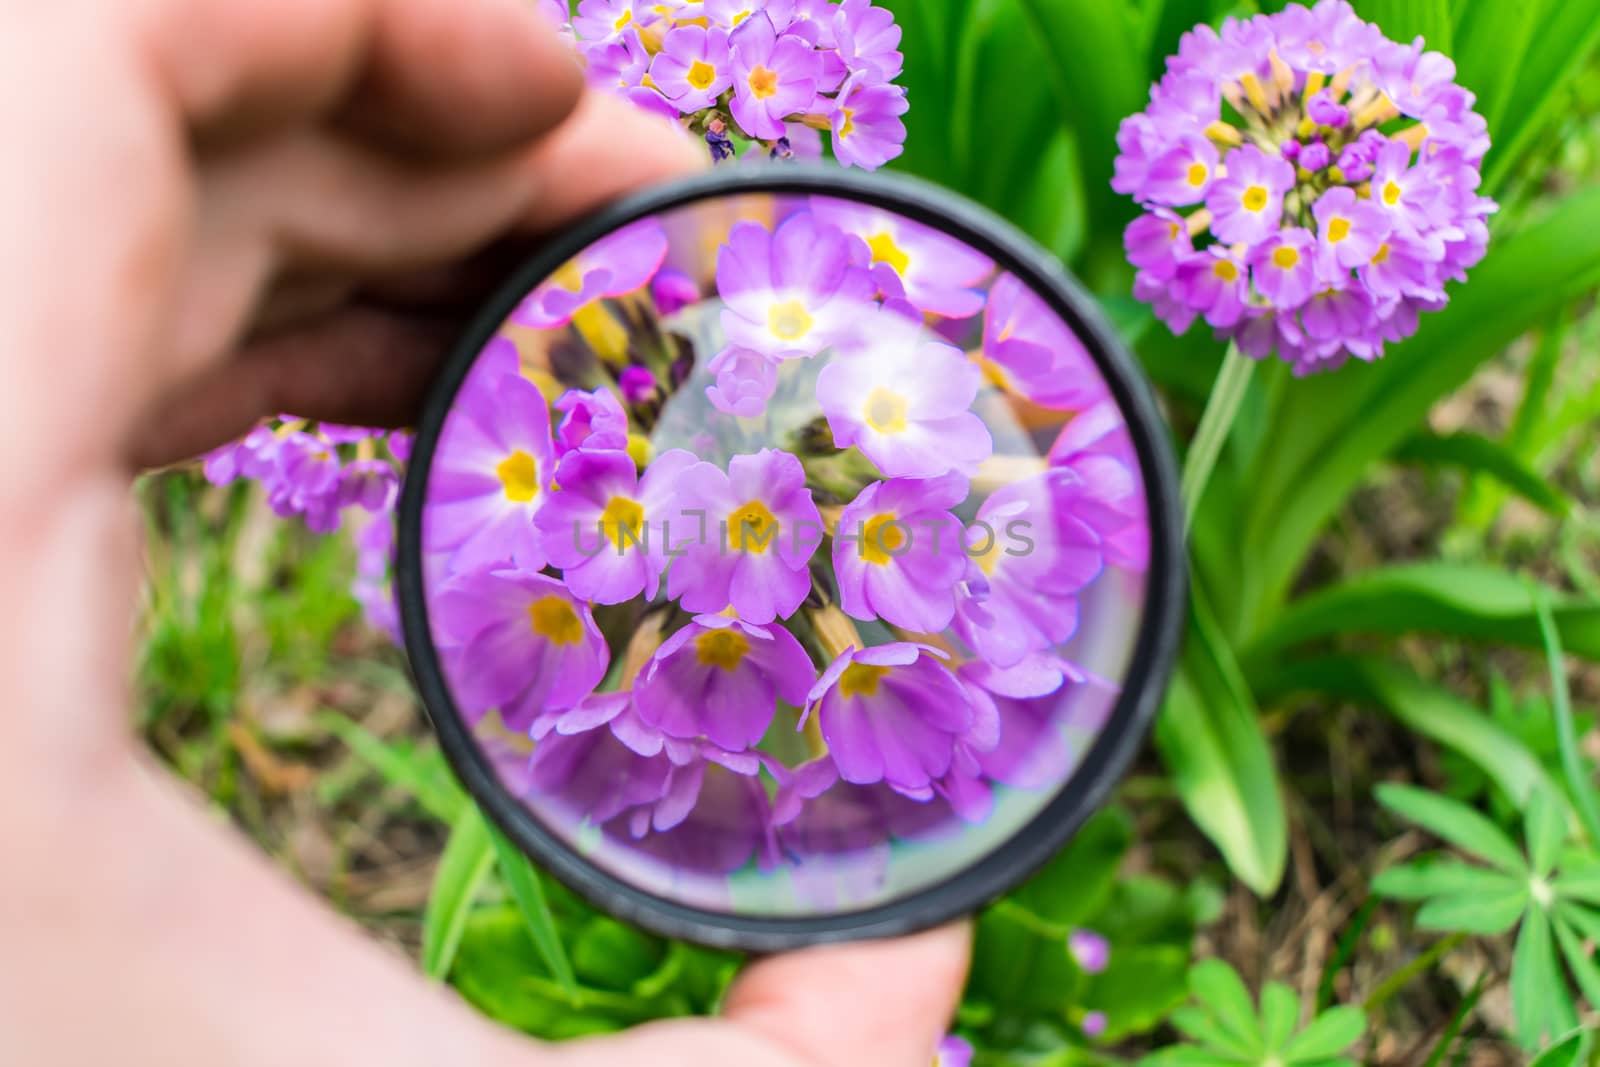 The gardener examines flowers through a magnifying glass to identify problems